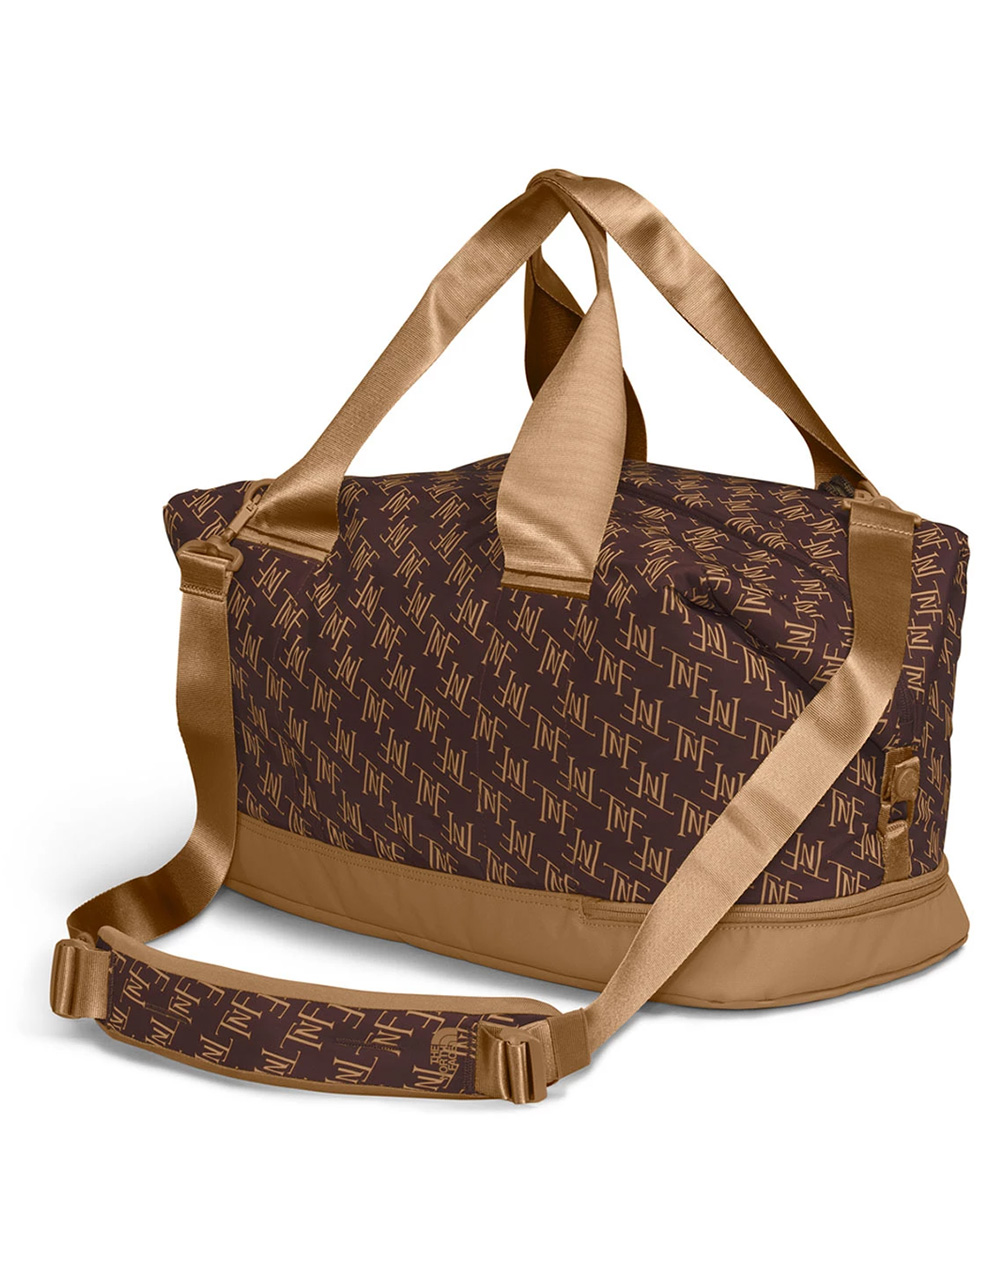 Duffle And Weekender Designer By Louis Vuitton Size: Large